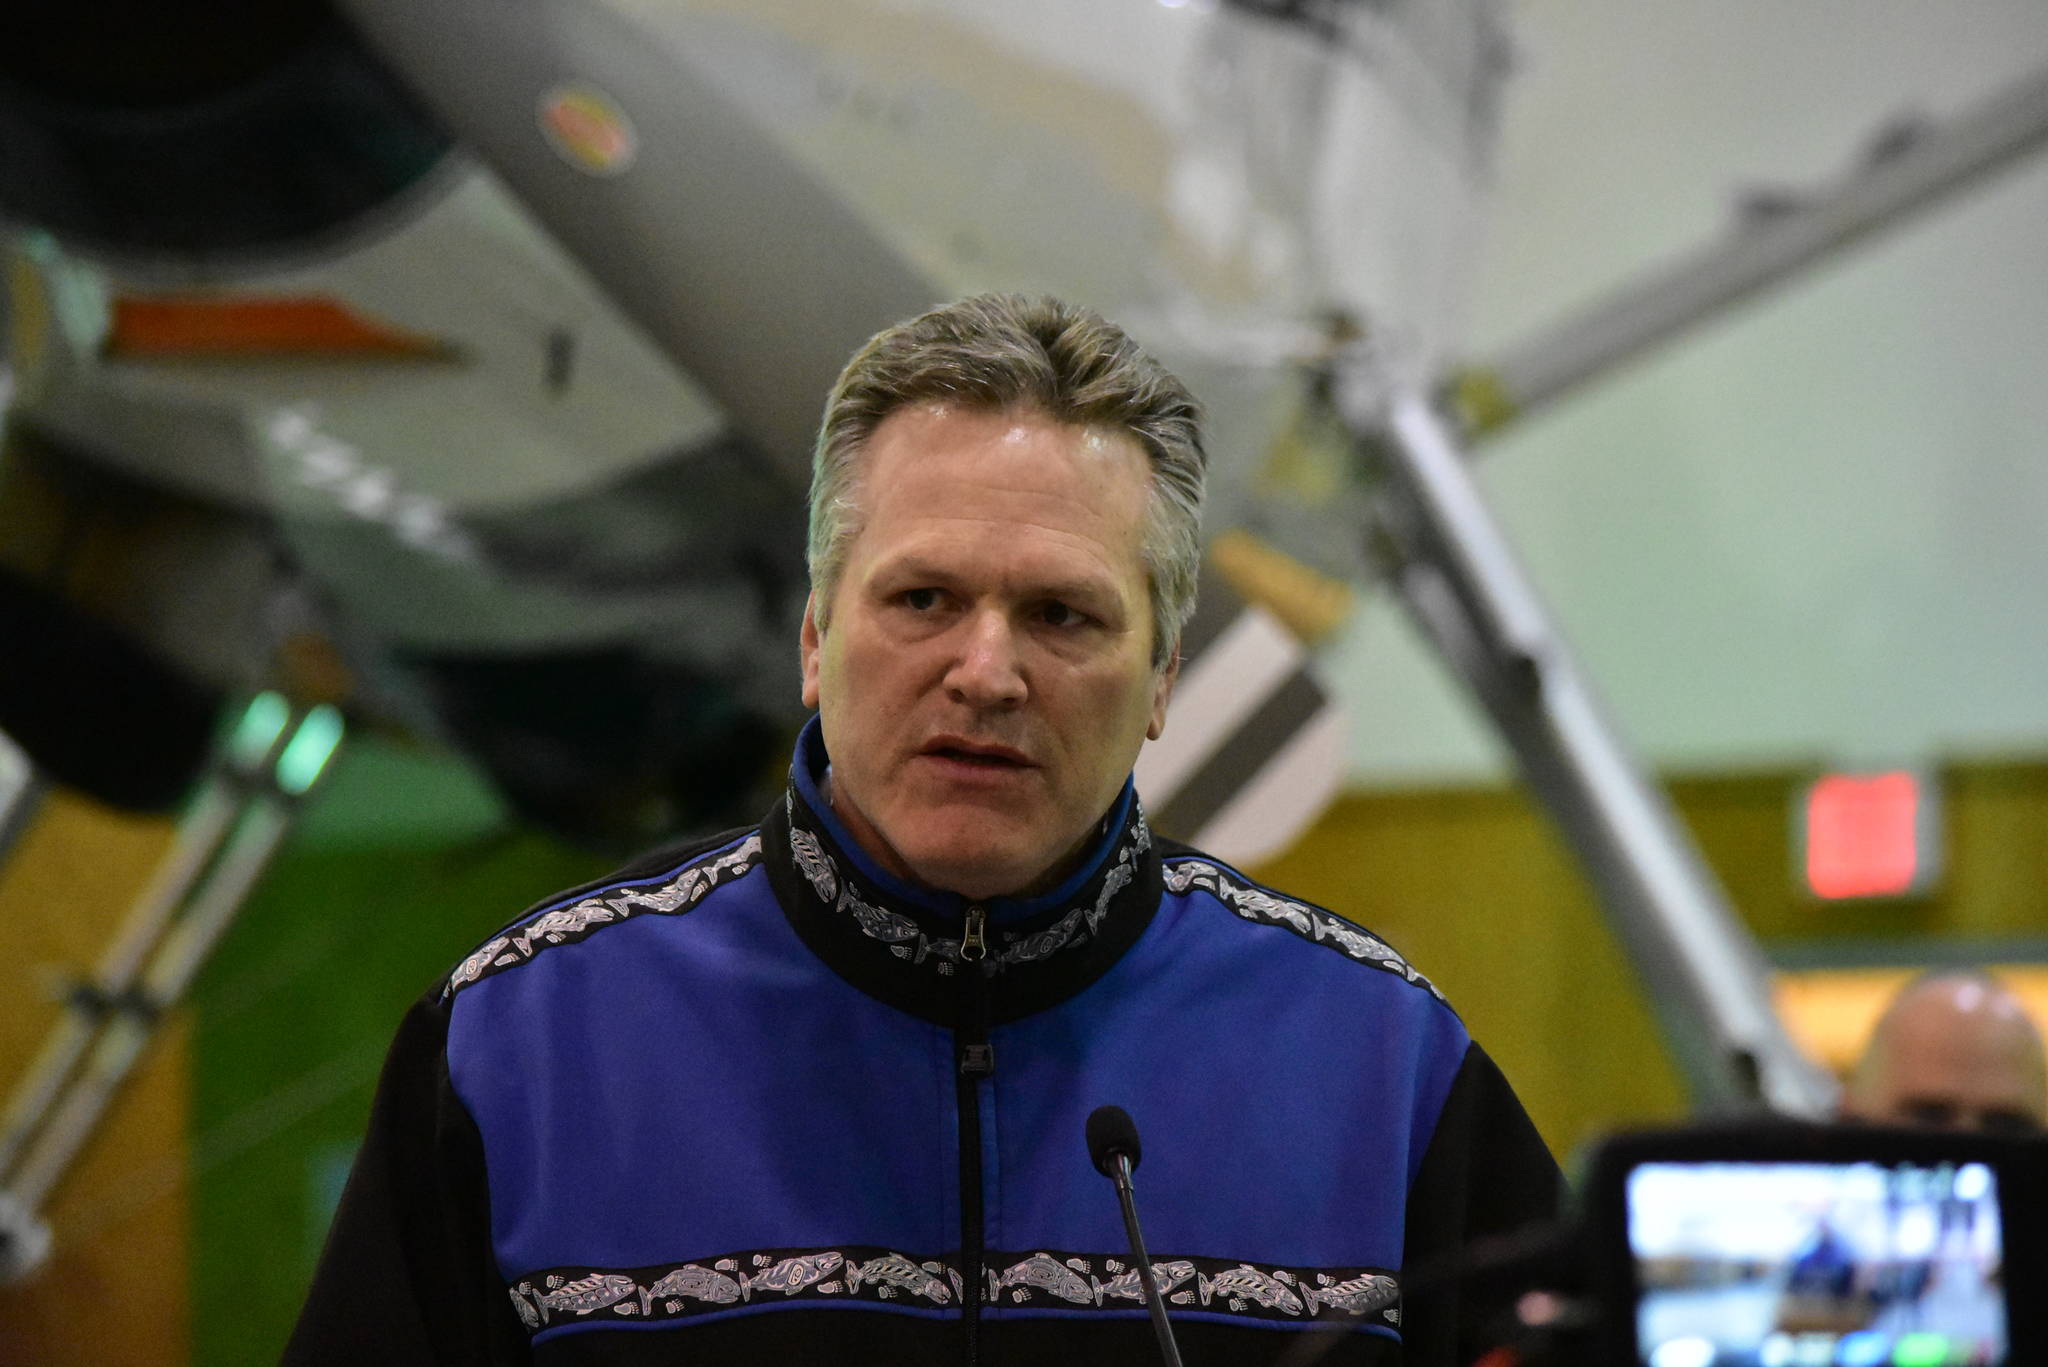 Gov. Mike Dunleavy, shown here on April 9 at the Wings Airways hangar in Juneau, held a news conference in Anchorage on April 16, 2021 announcing his office’s plans for supporting tourism in Alaska going forward. (Peter Segall / Juneau Empire )